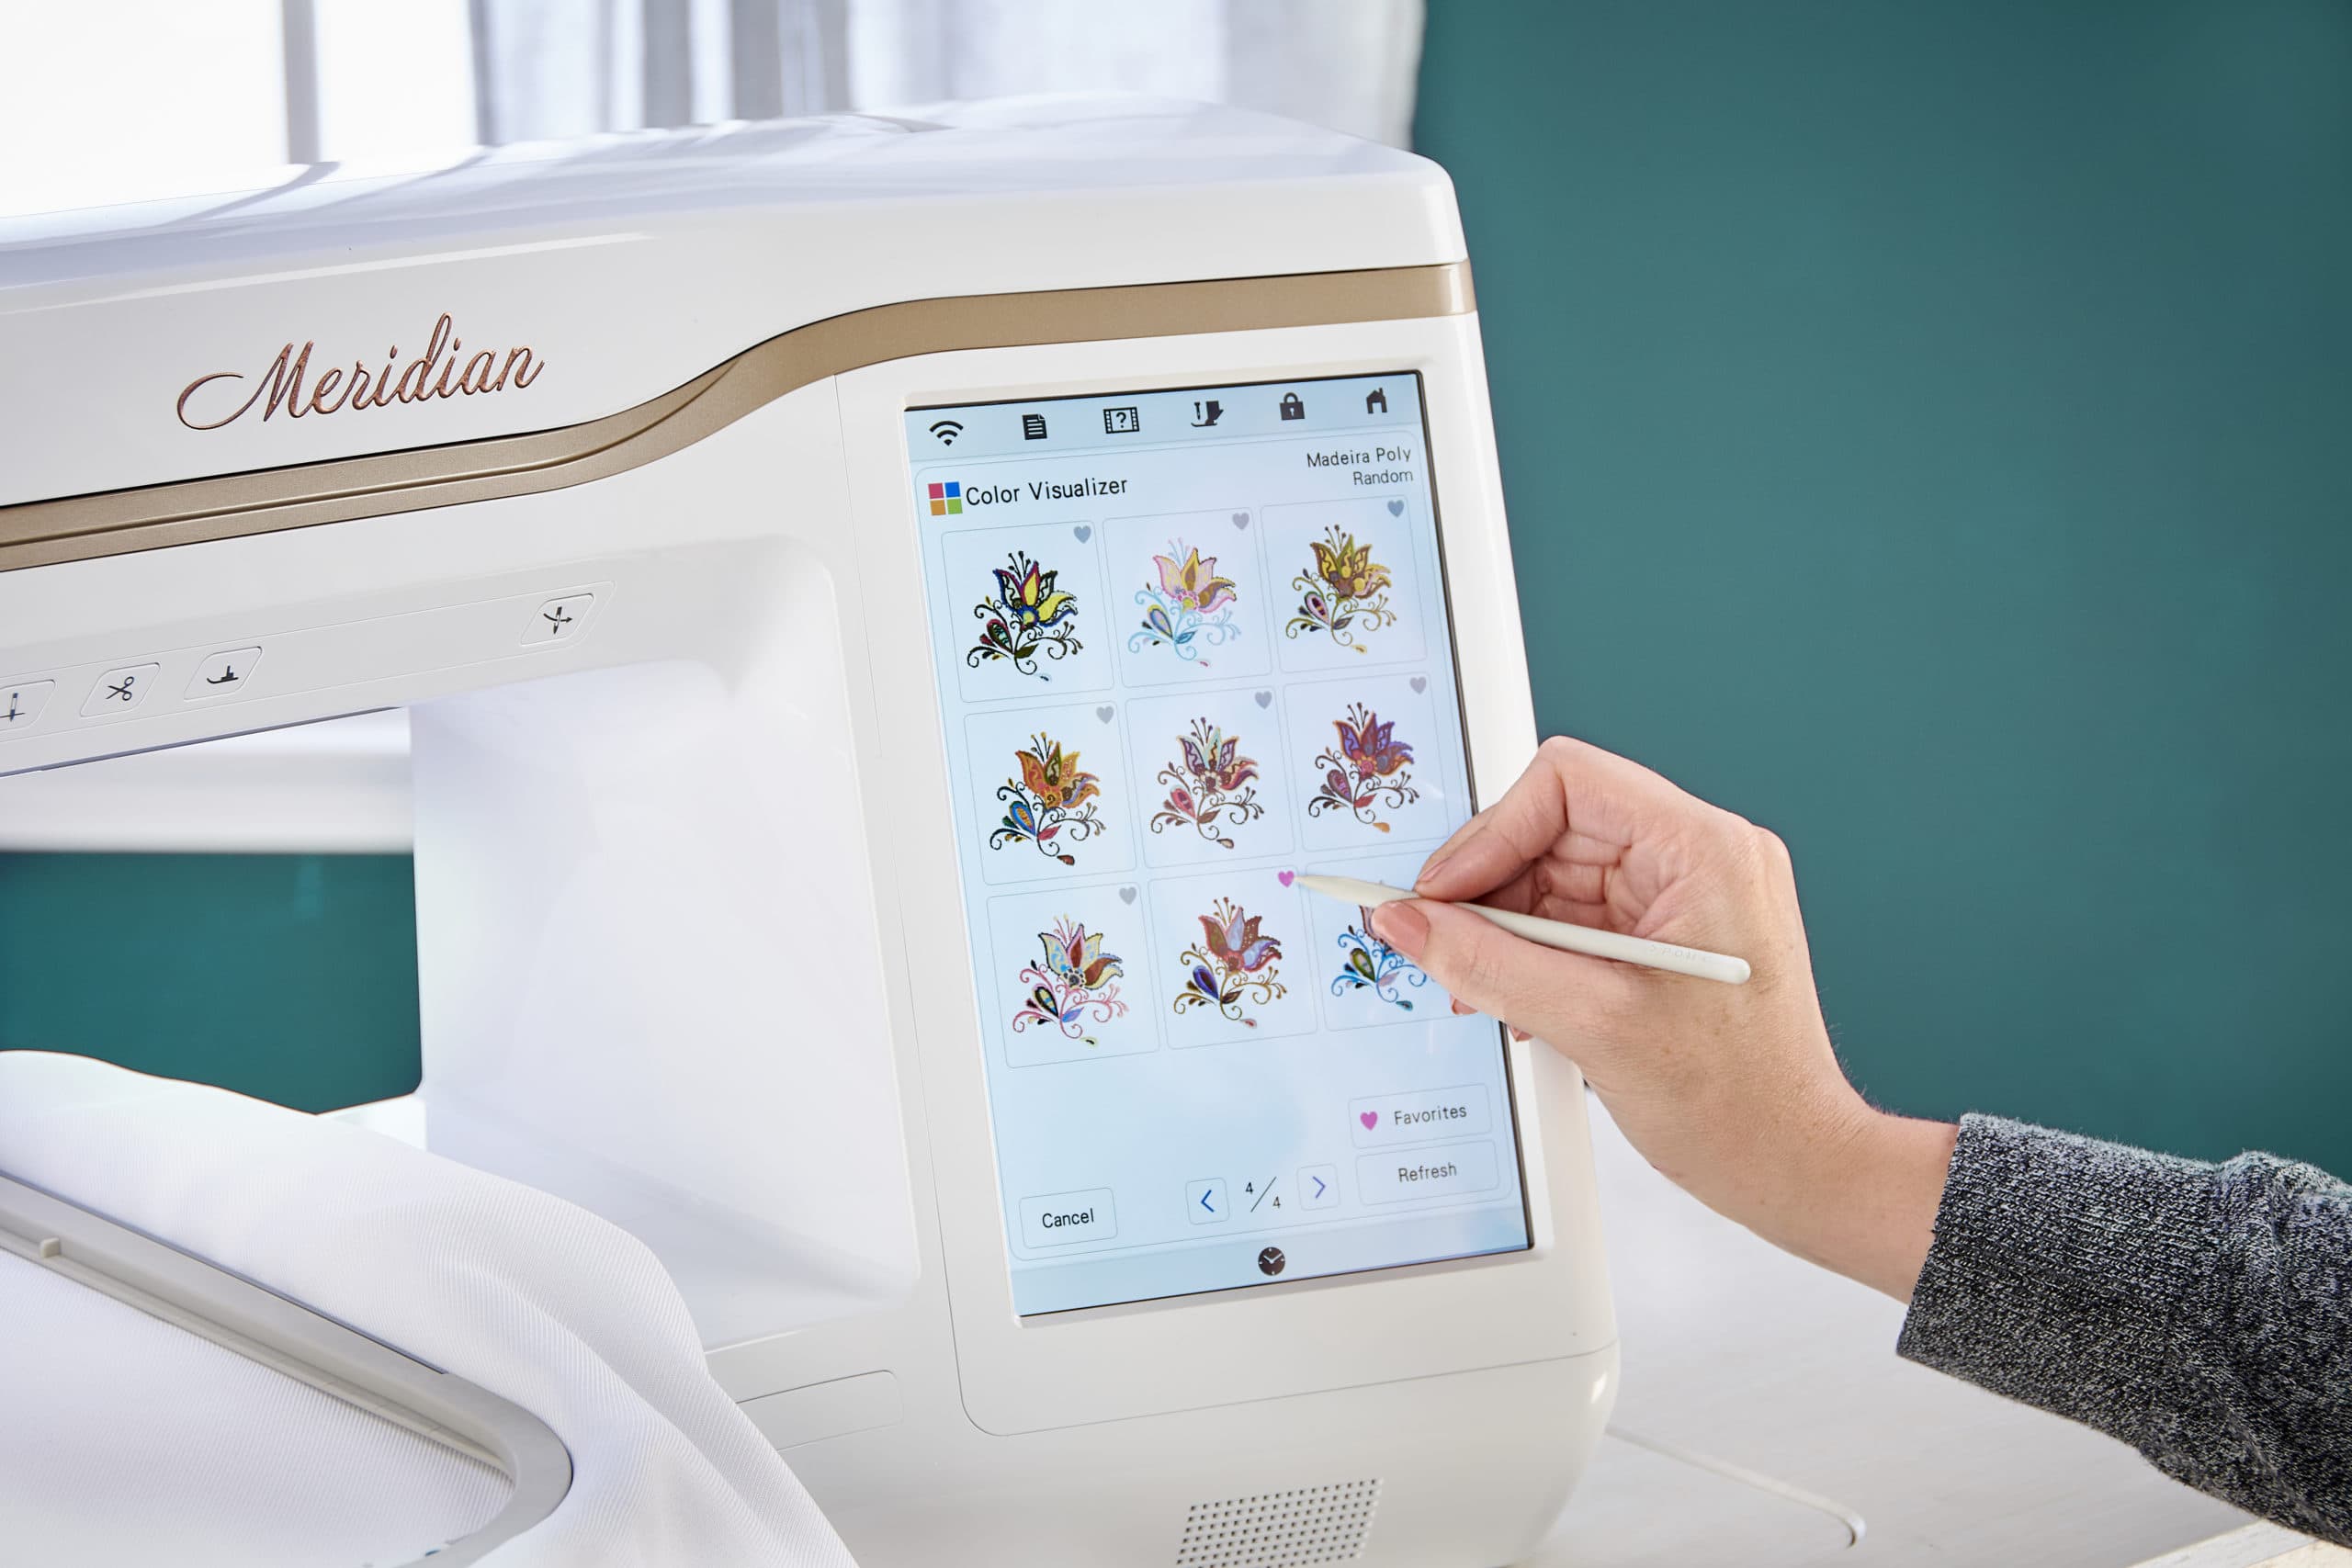 The Ultimate Babylock Embroidery Machine Guide